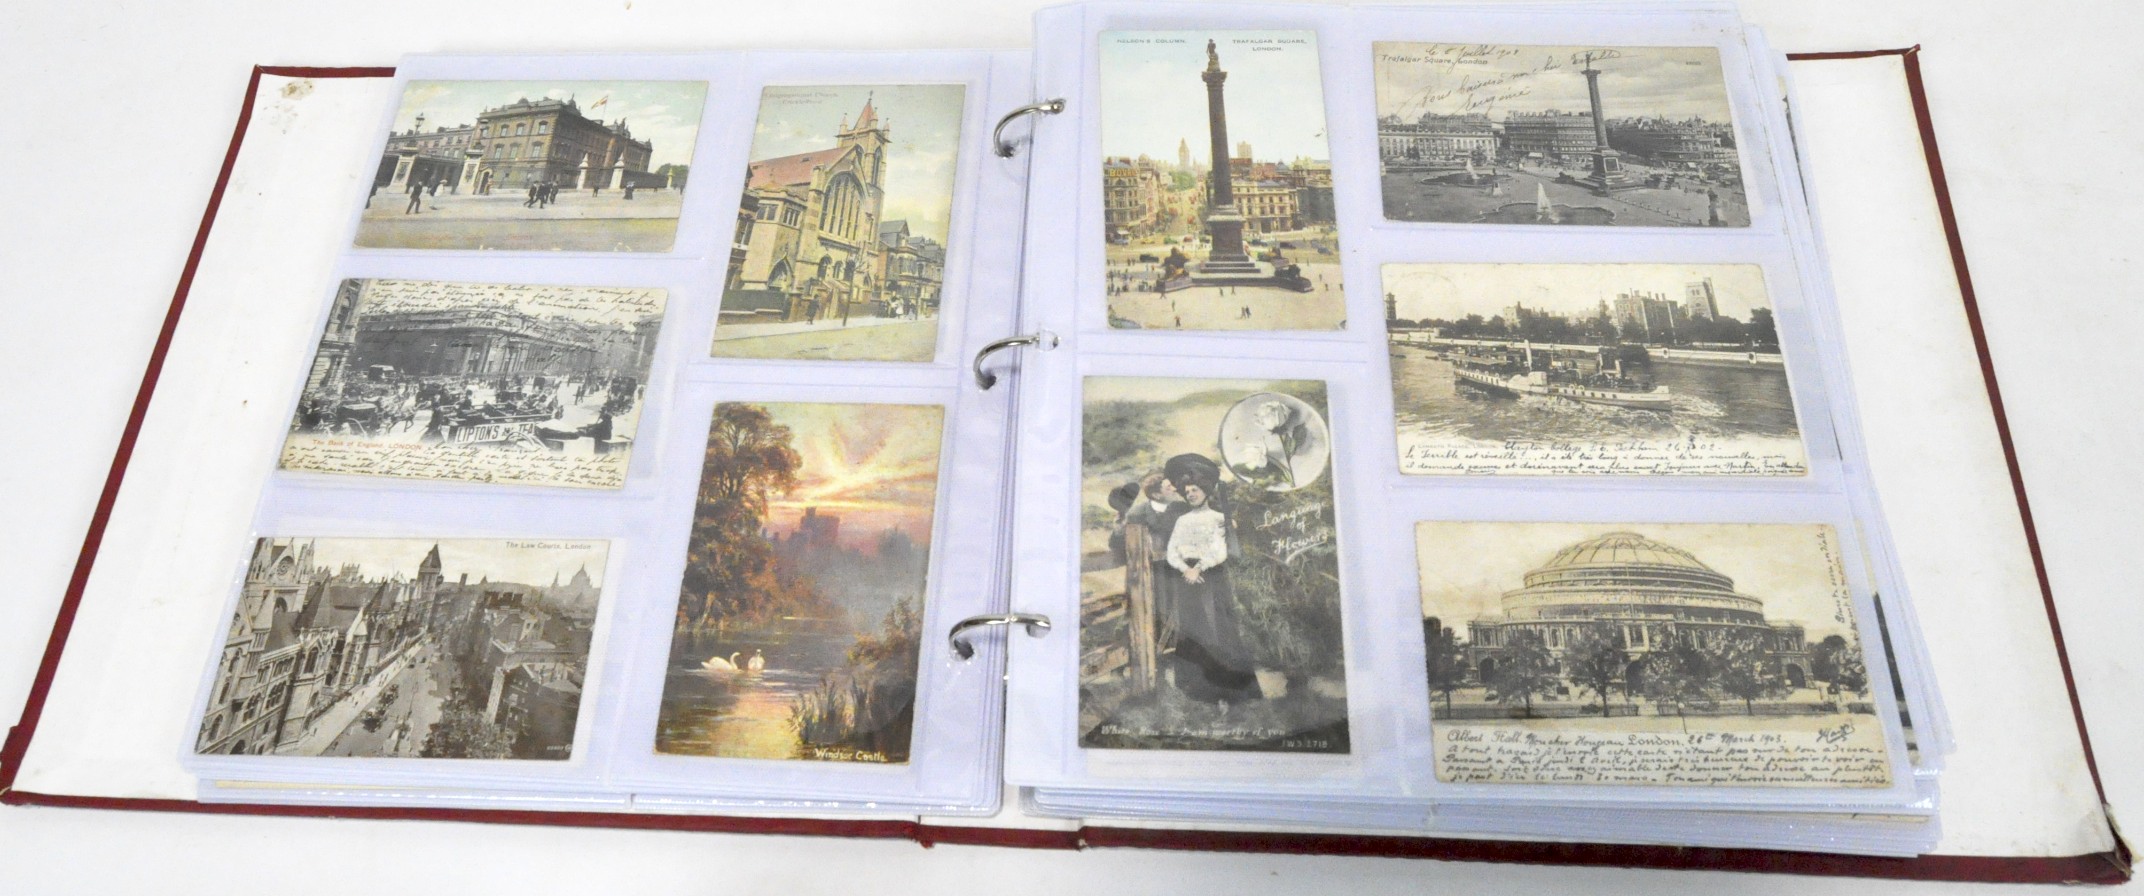 A large collection of vintage postcards, depicting historic landmarks and architecture, - Image 2 of 3